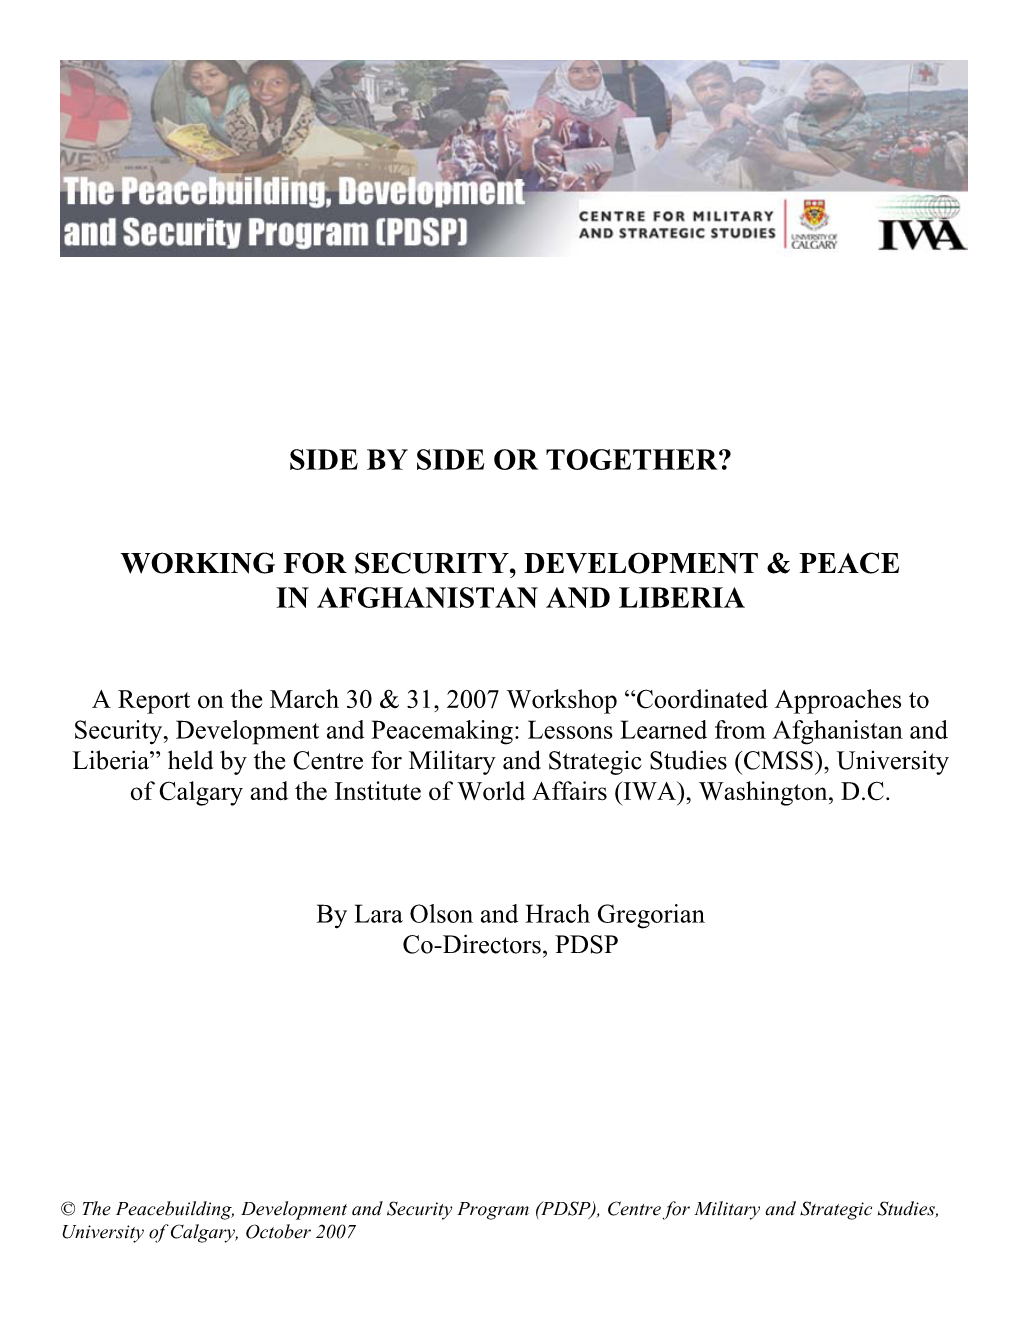 Working for Security, Development & Peace in Afghanistan and Liberia